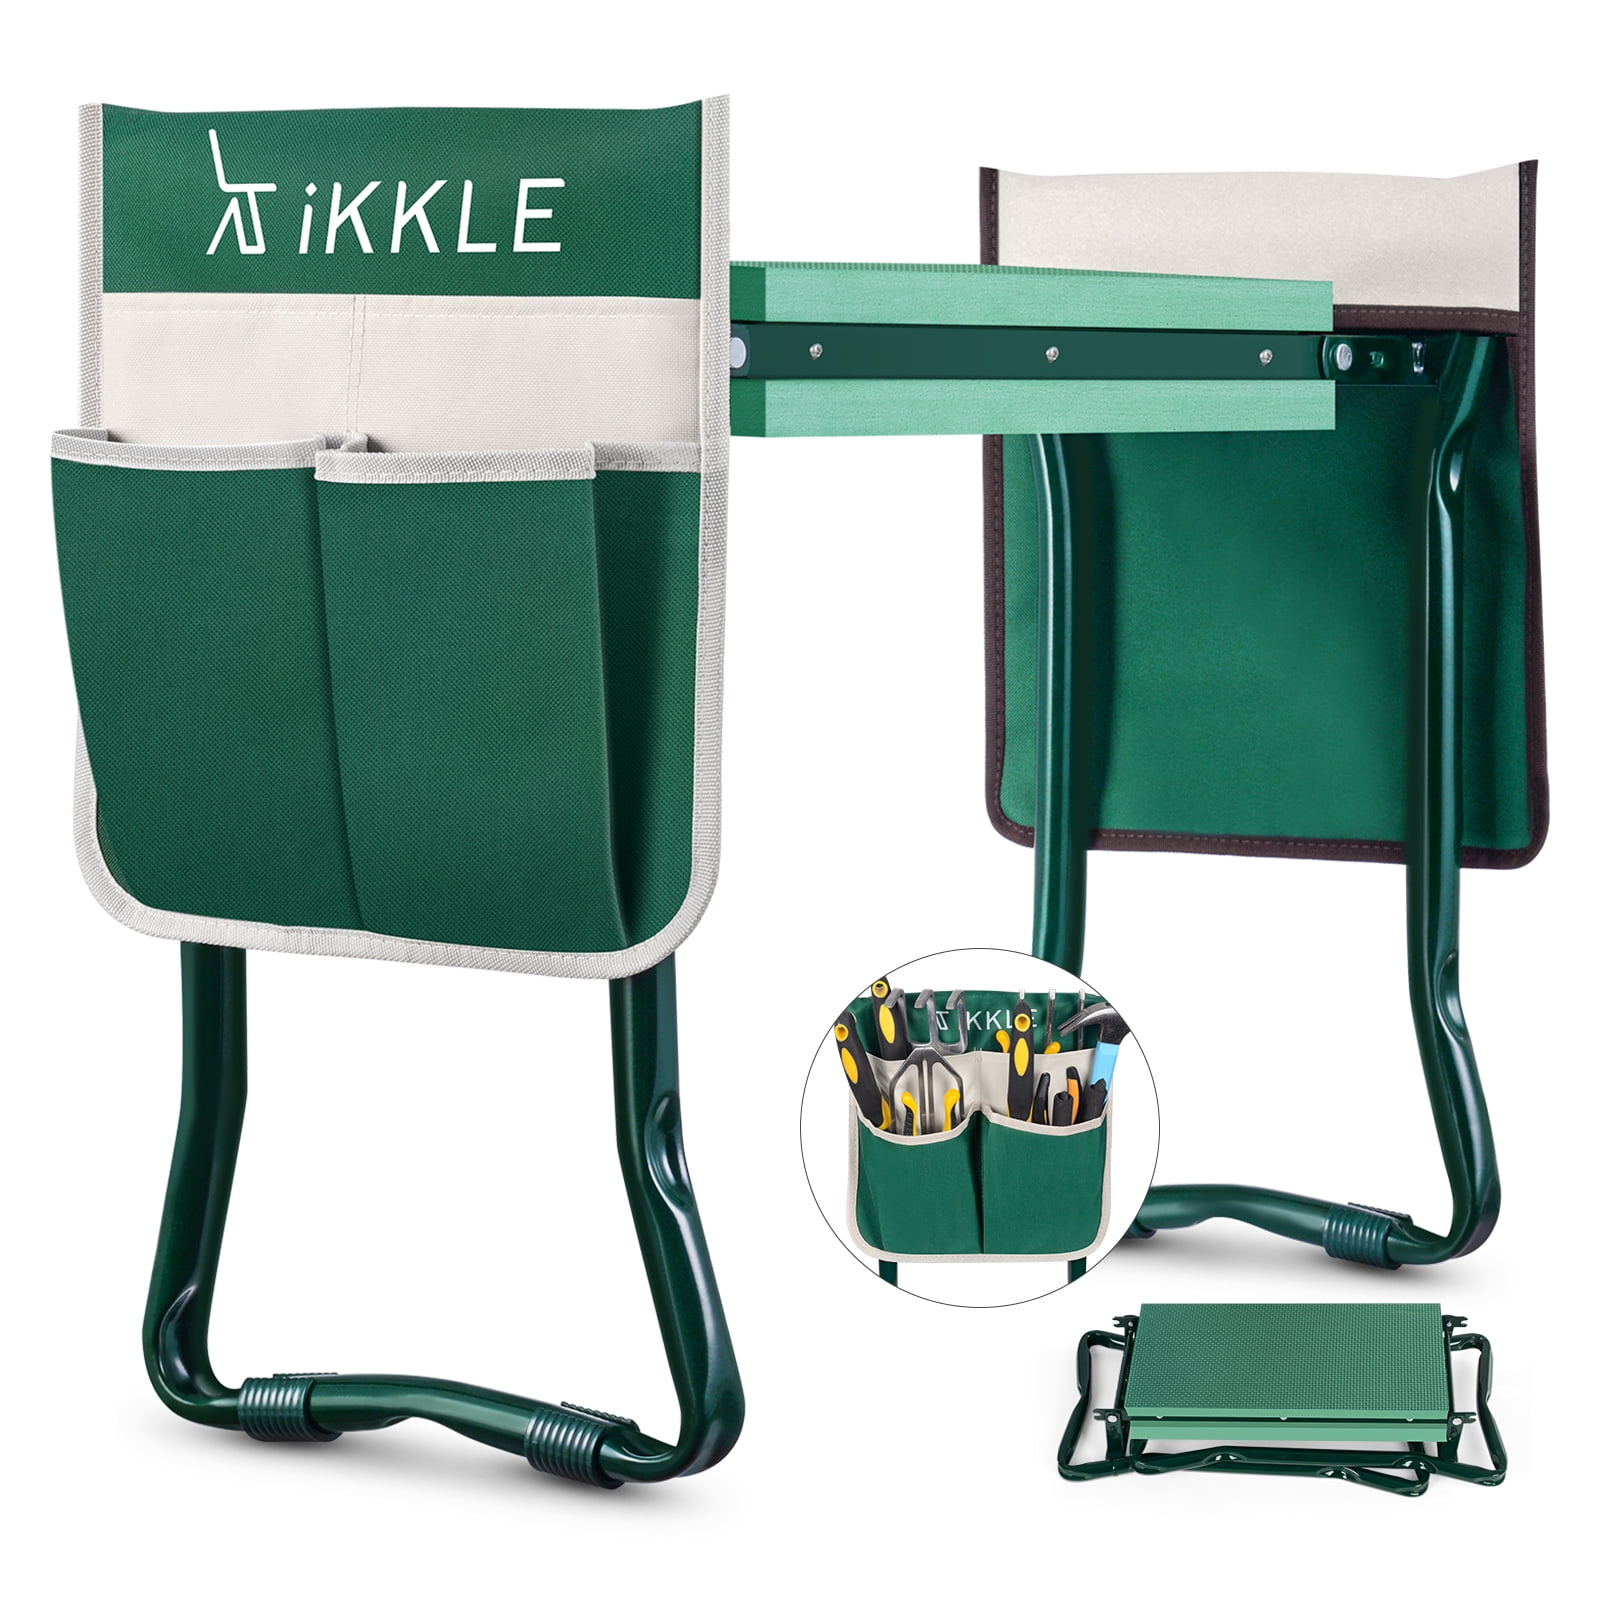 Green Garden Kneeler Sturdy Foldable Portable Bearing 150KG Heavy Duty Stool Gardening Soft Lightweight Protects Knees Outdoor EVA Foam Pad with Tool Pouch Multifunctional Seat